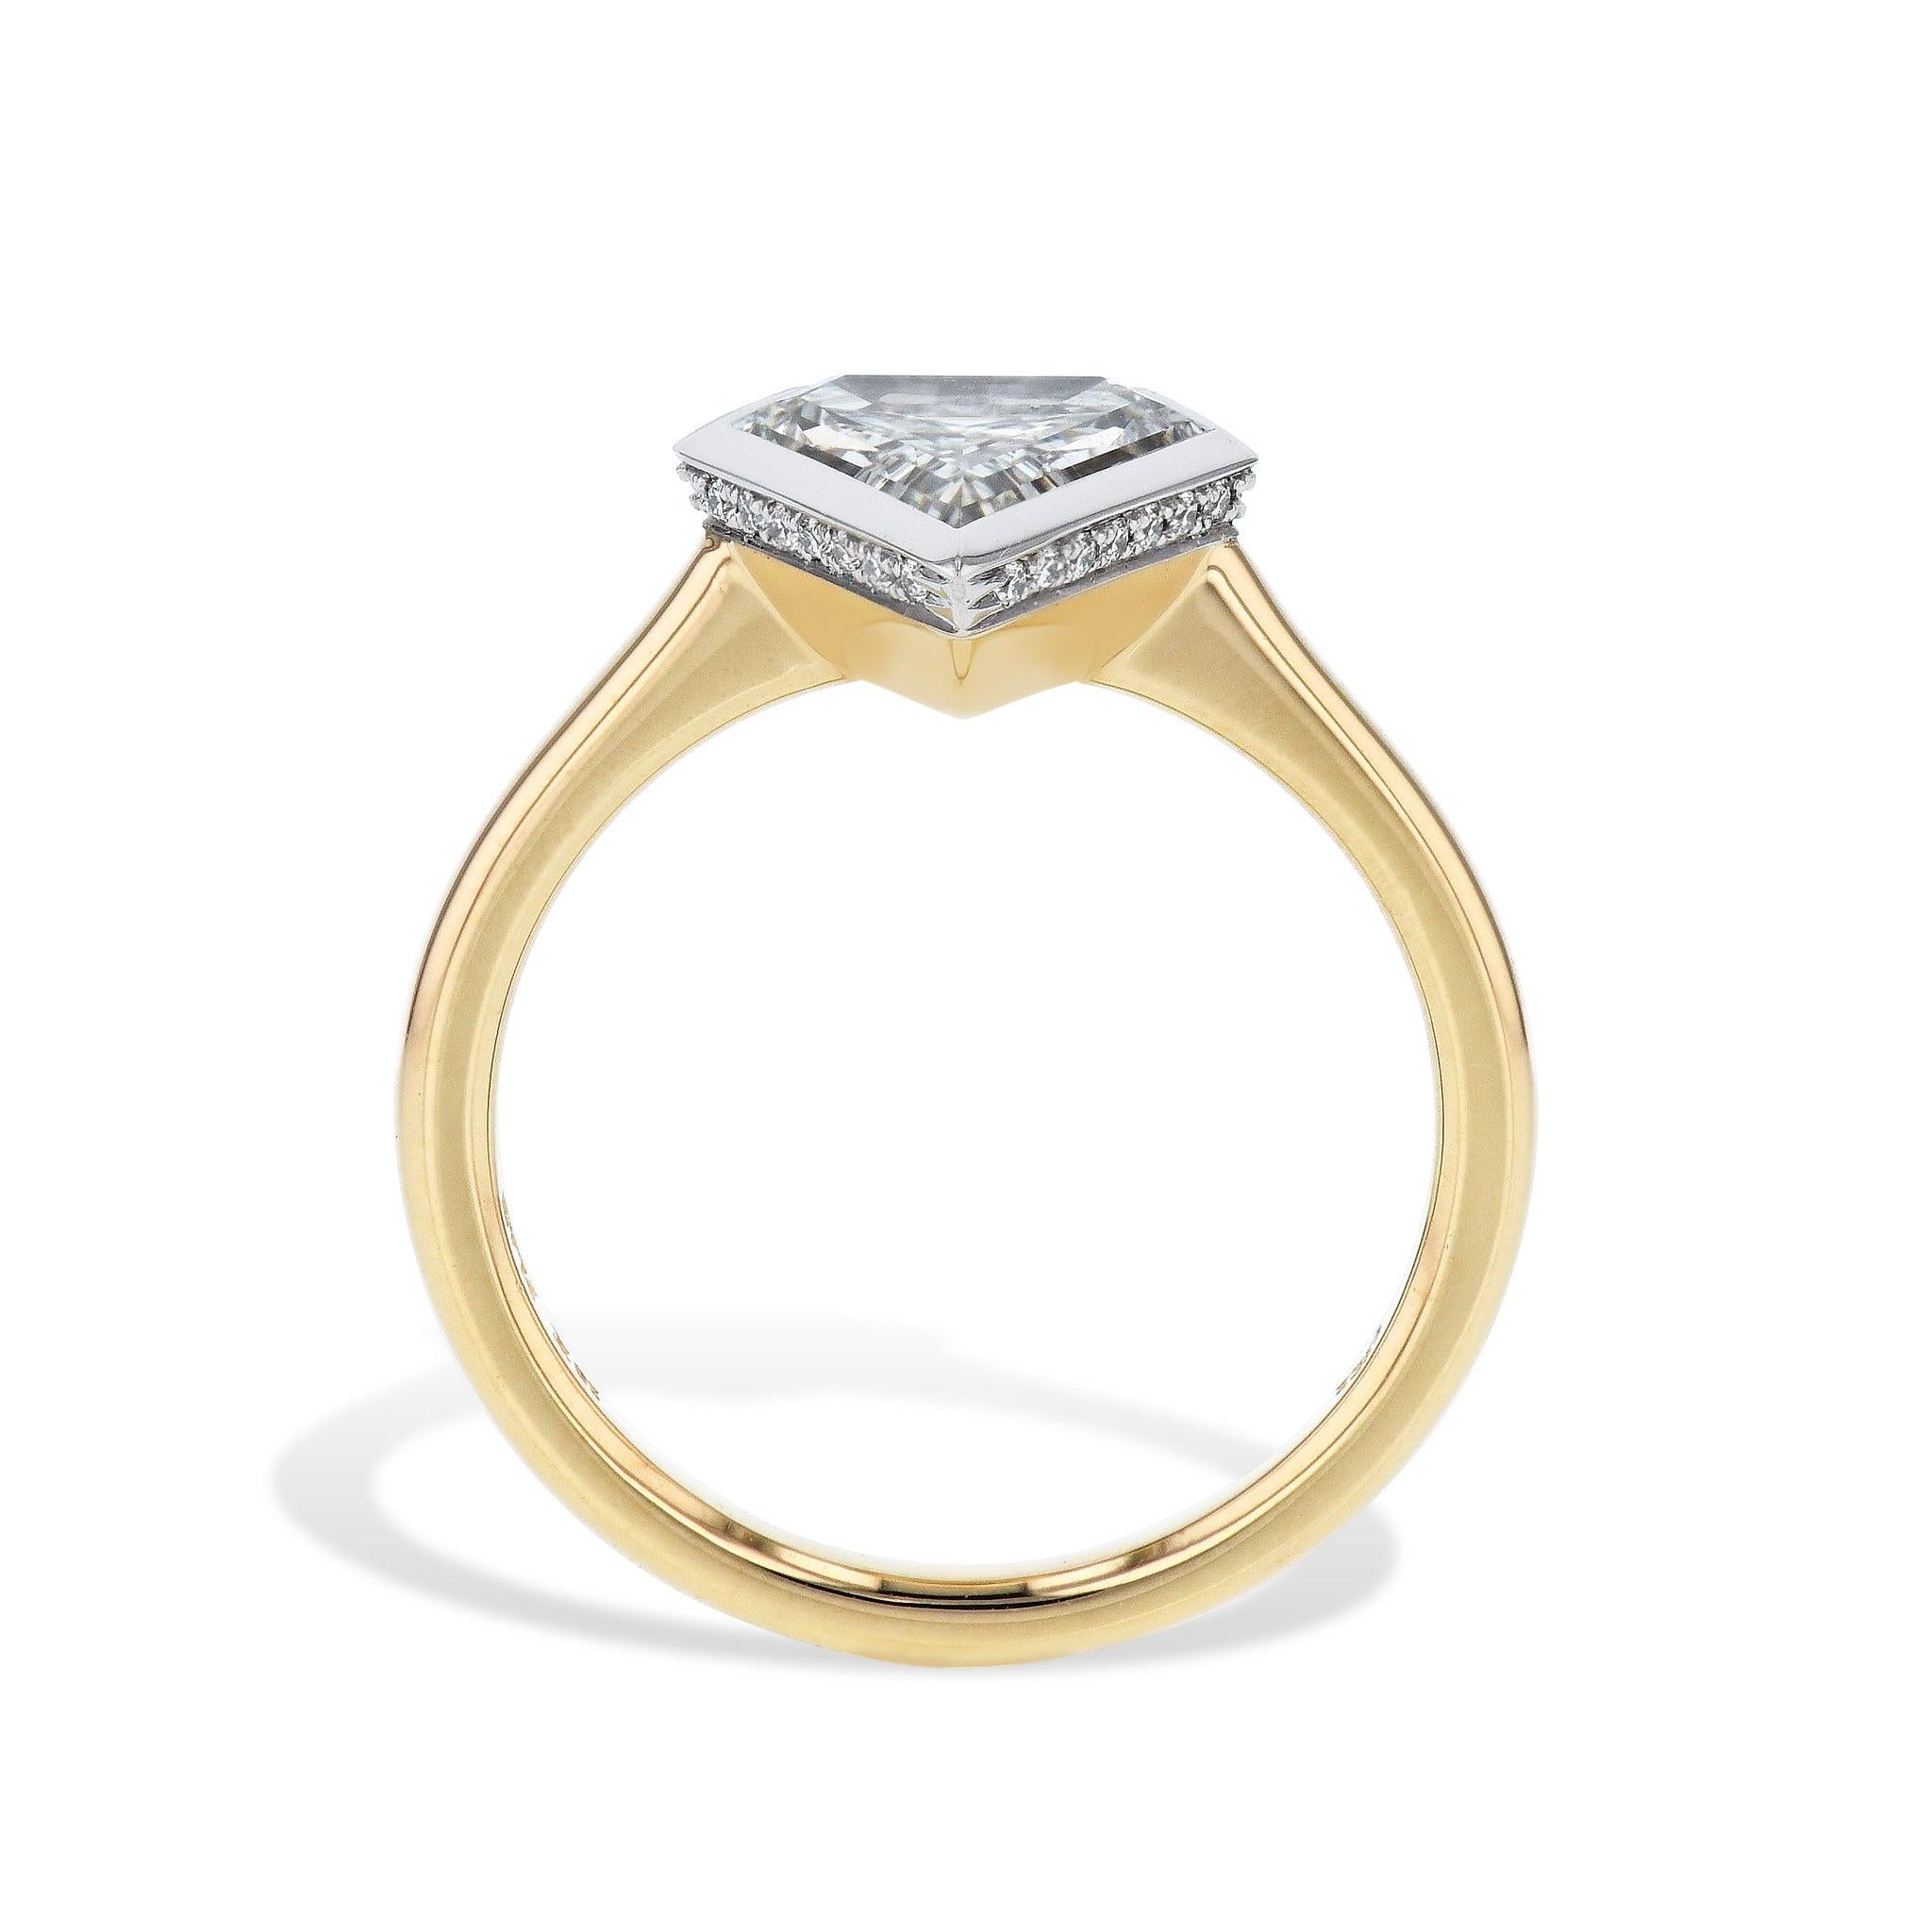 This stunning, handcrafted engagement ring features a magnificent shield-shaped diamond in the center, surrounded by 25 pave-set diamonds underneath. The platinum and 18kt yellow gold shank adds a touch of elegance and luxury, making it a truly